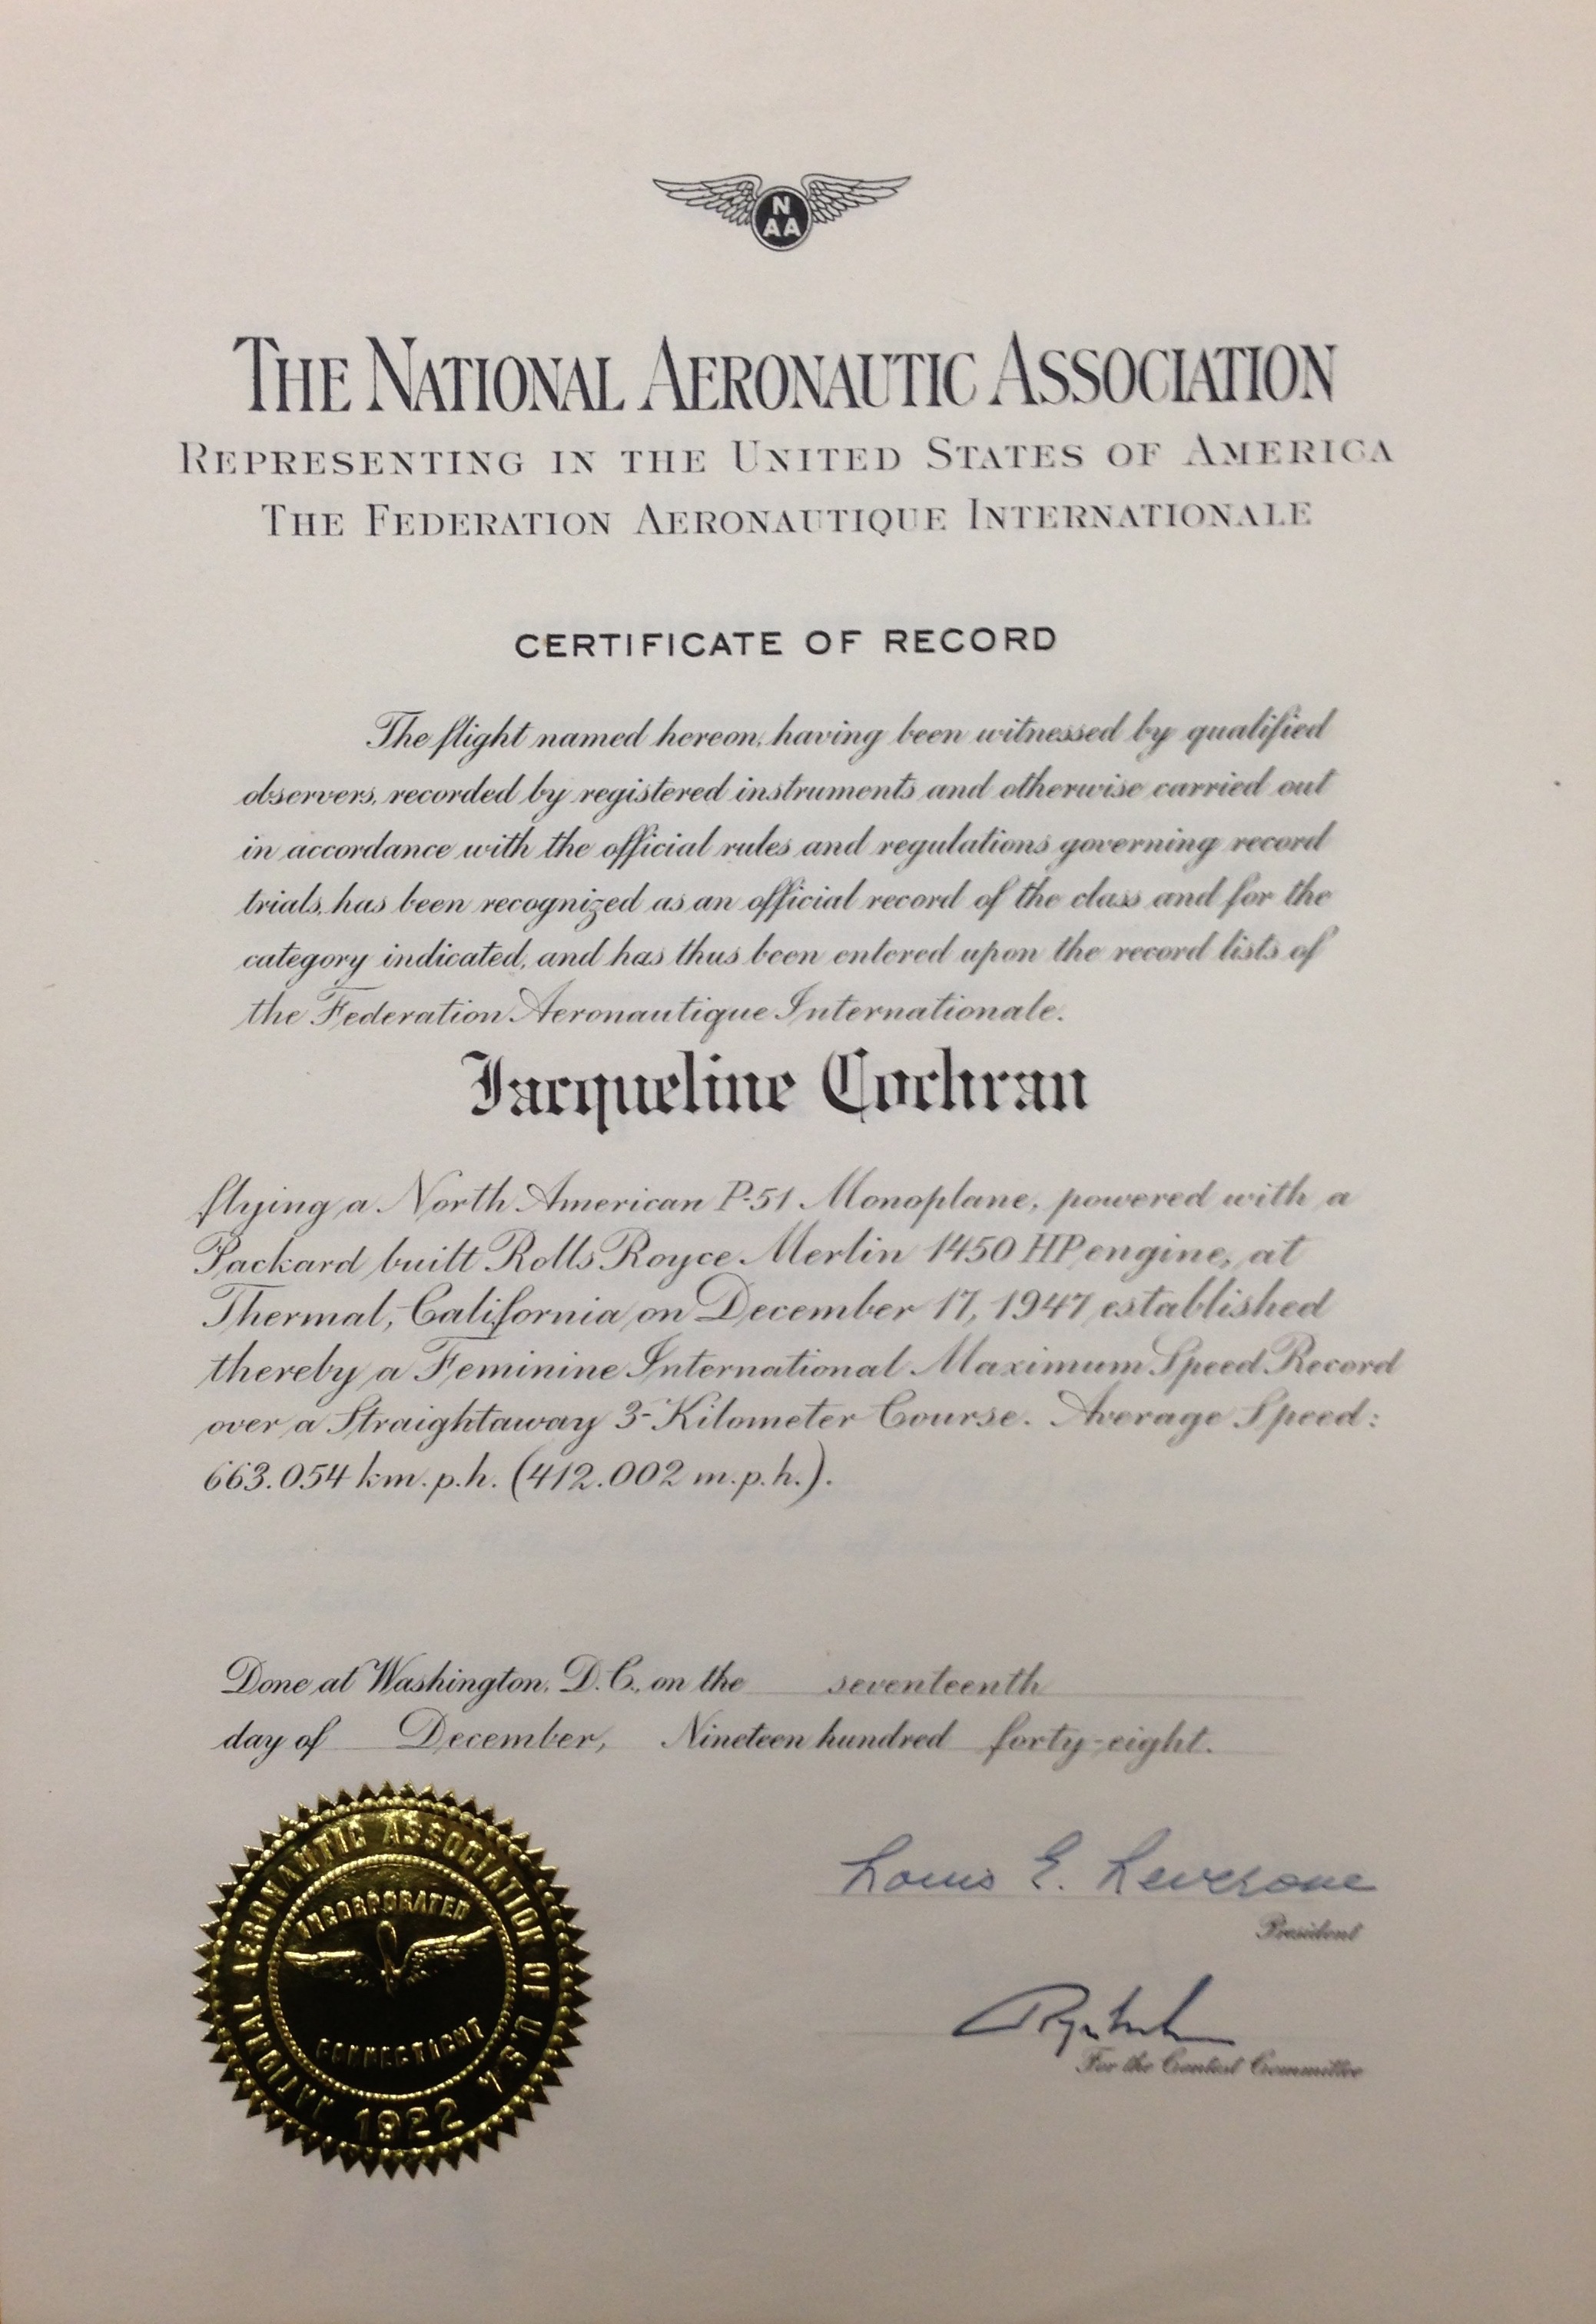 National Aeronautic association Certificate of Record in the San Diego Air and Space Museum Archive. (Bryan R. Swopes)